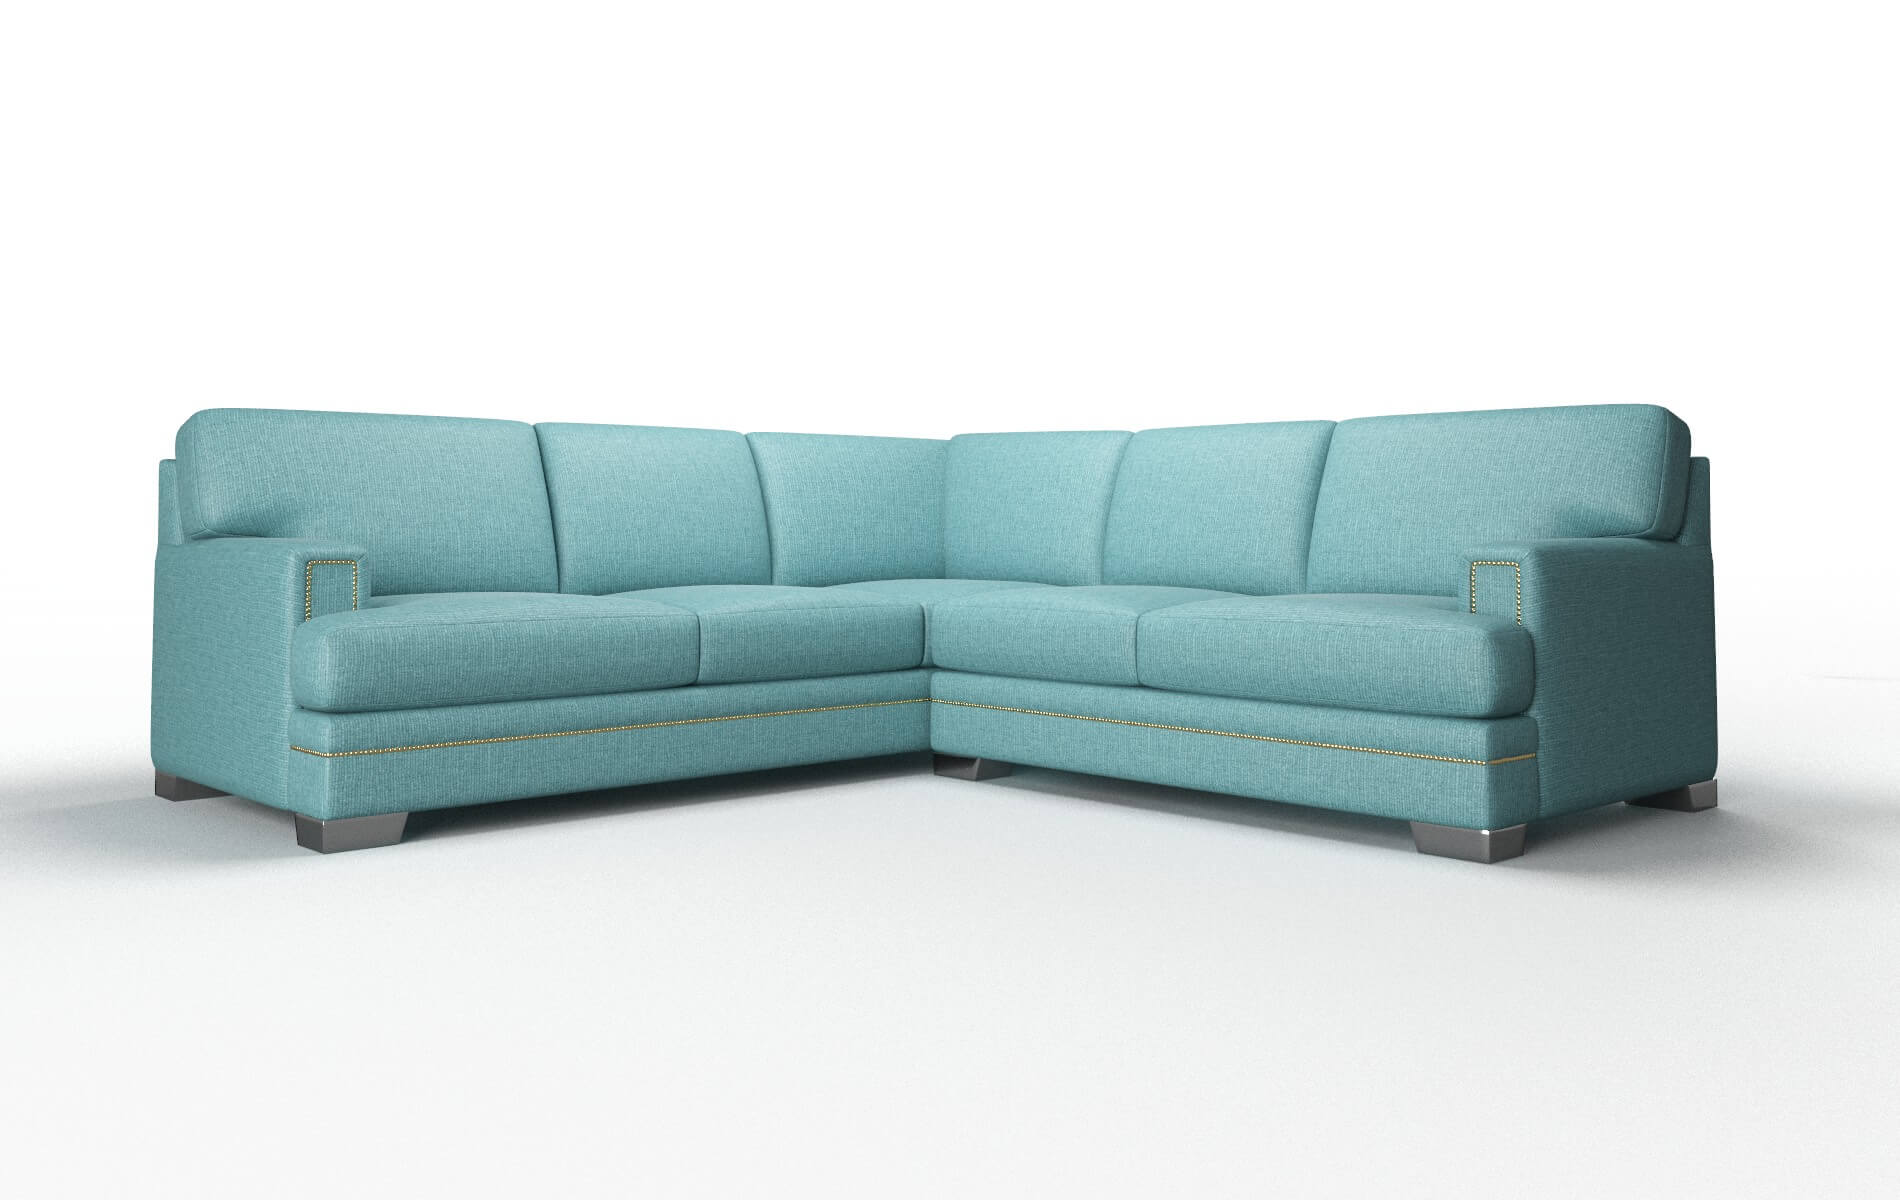 Barcelona Parker Turquoise Sectional metal legs 1